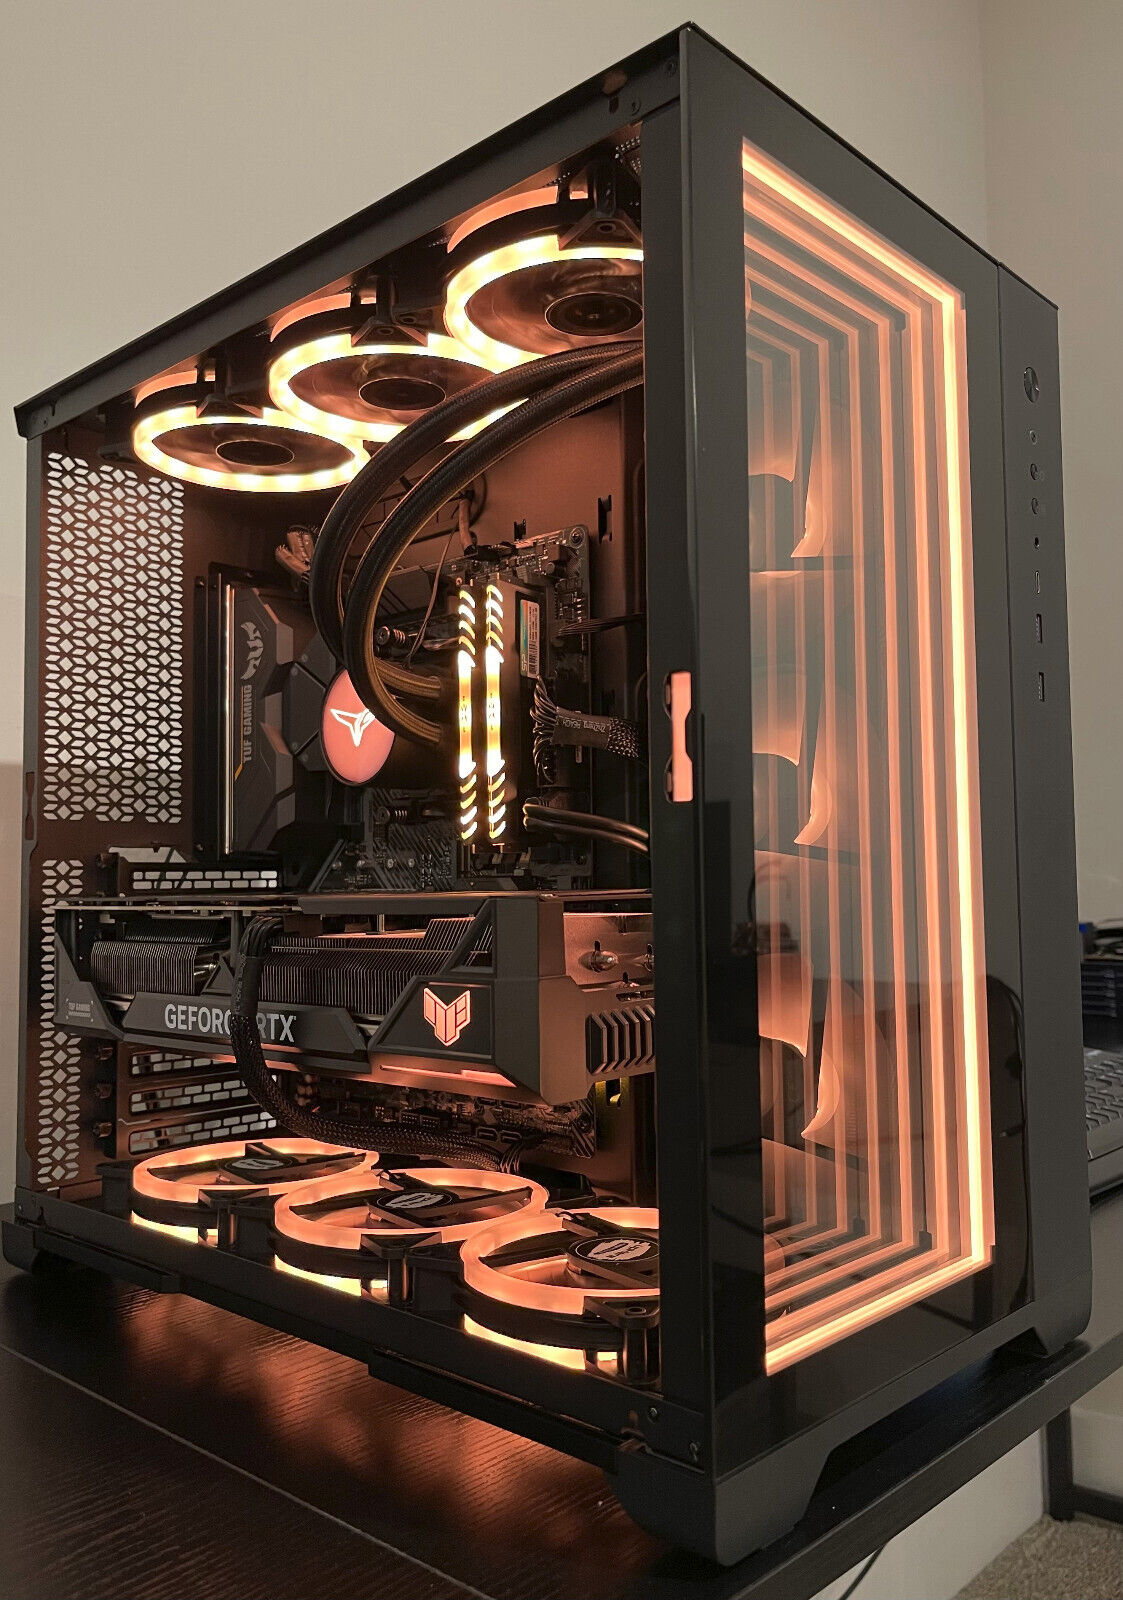 Premium Photo  Gaming pc with rgb led lights on a computer, assembled with  hardware components